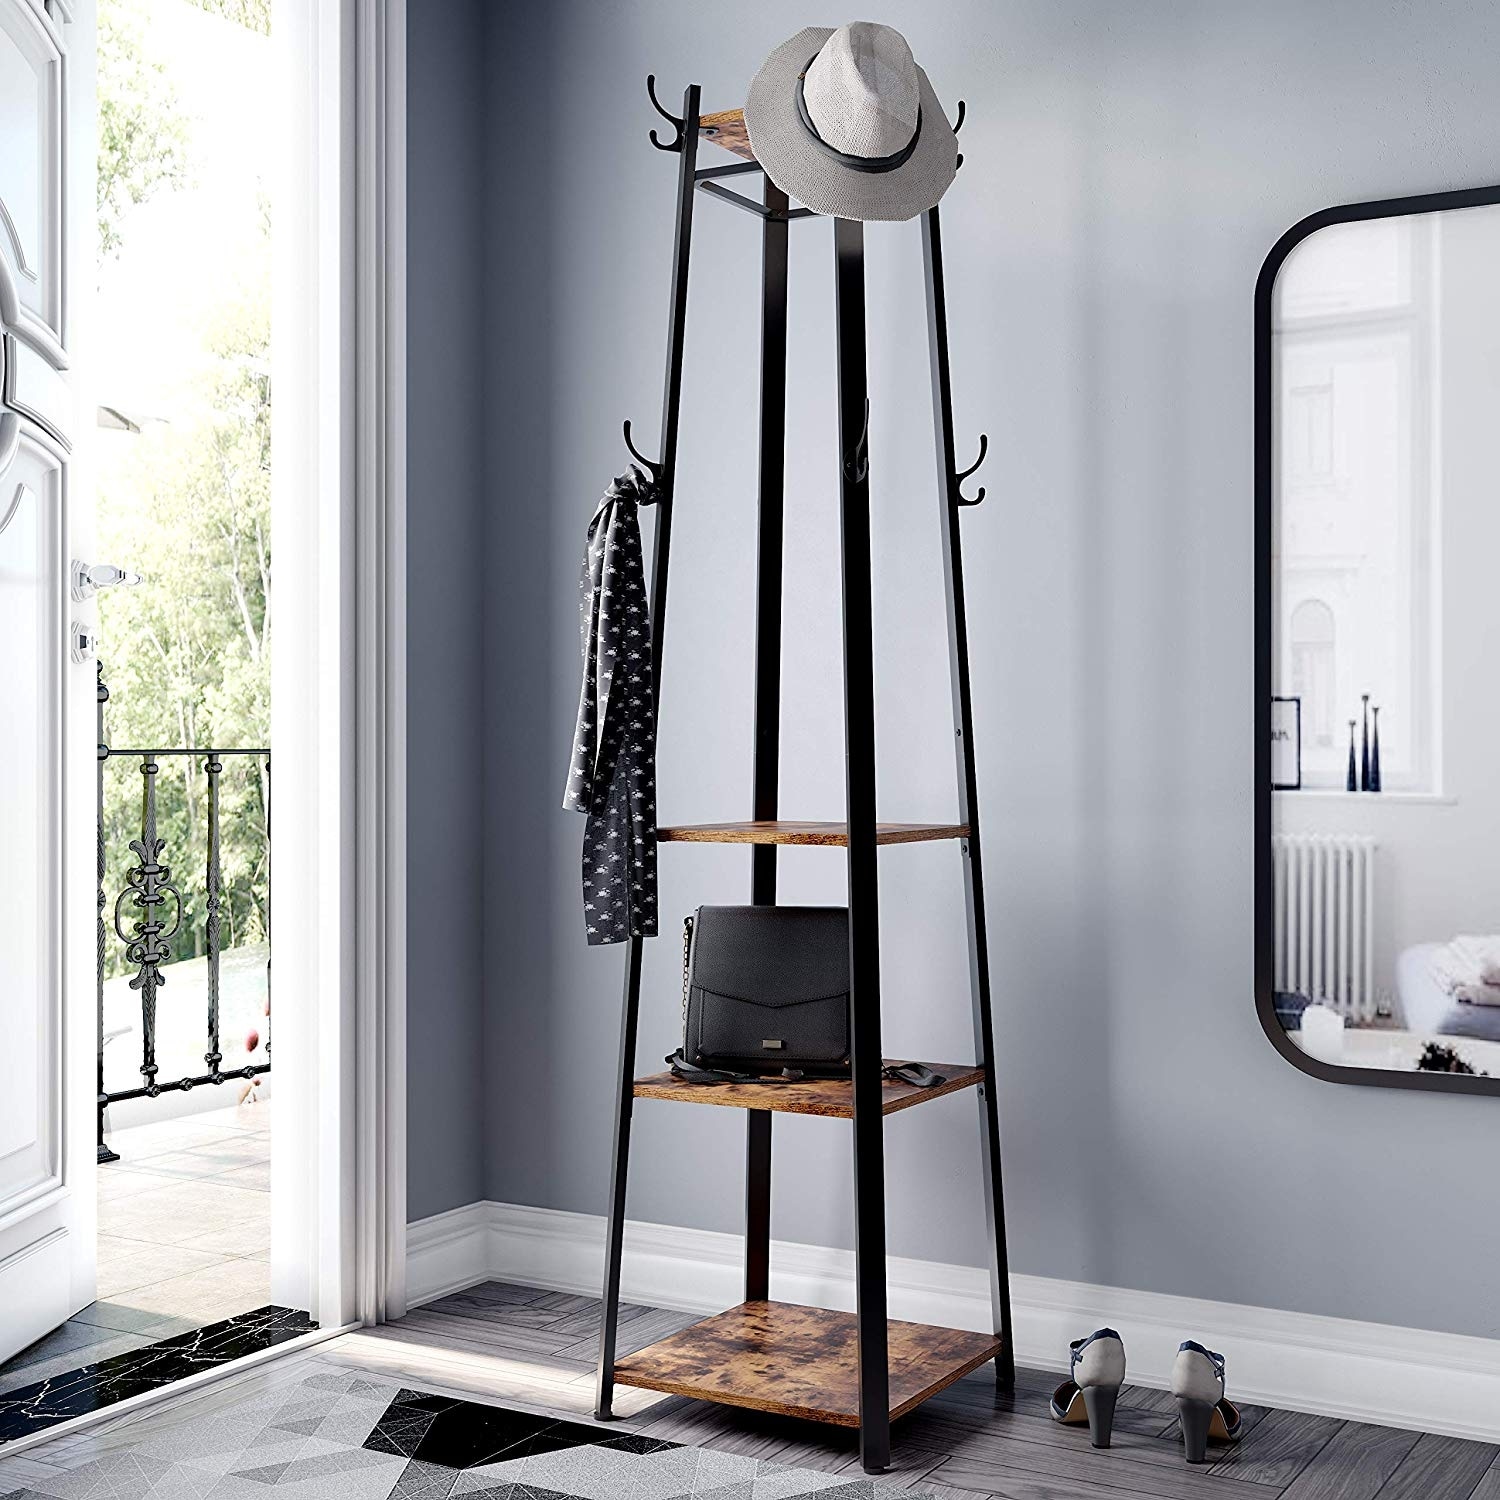 https://ak1.ostkcdn.com/images/products/is/images/direct/4d1f3f817e2cfa8e254f6d59d37850fb73fcb0d7/VASAGLE-Industrial-Coat-Rack%2C-Coat-Stand-with-3-Shelves%2C-Hall-Trees-Free-Standing-with-Hooks-and-Clothes-Rail.jpg